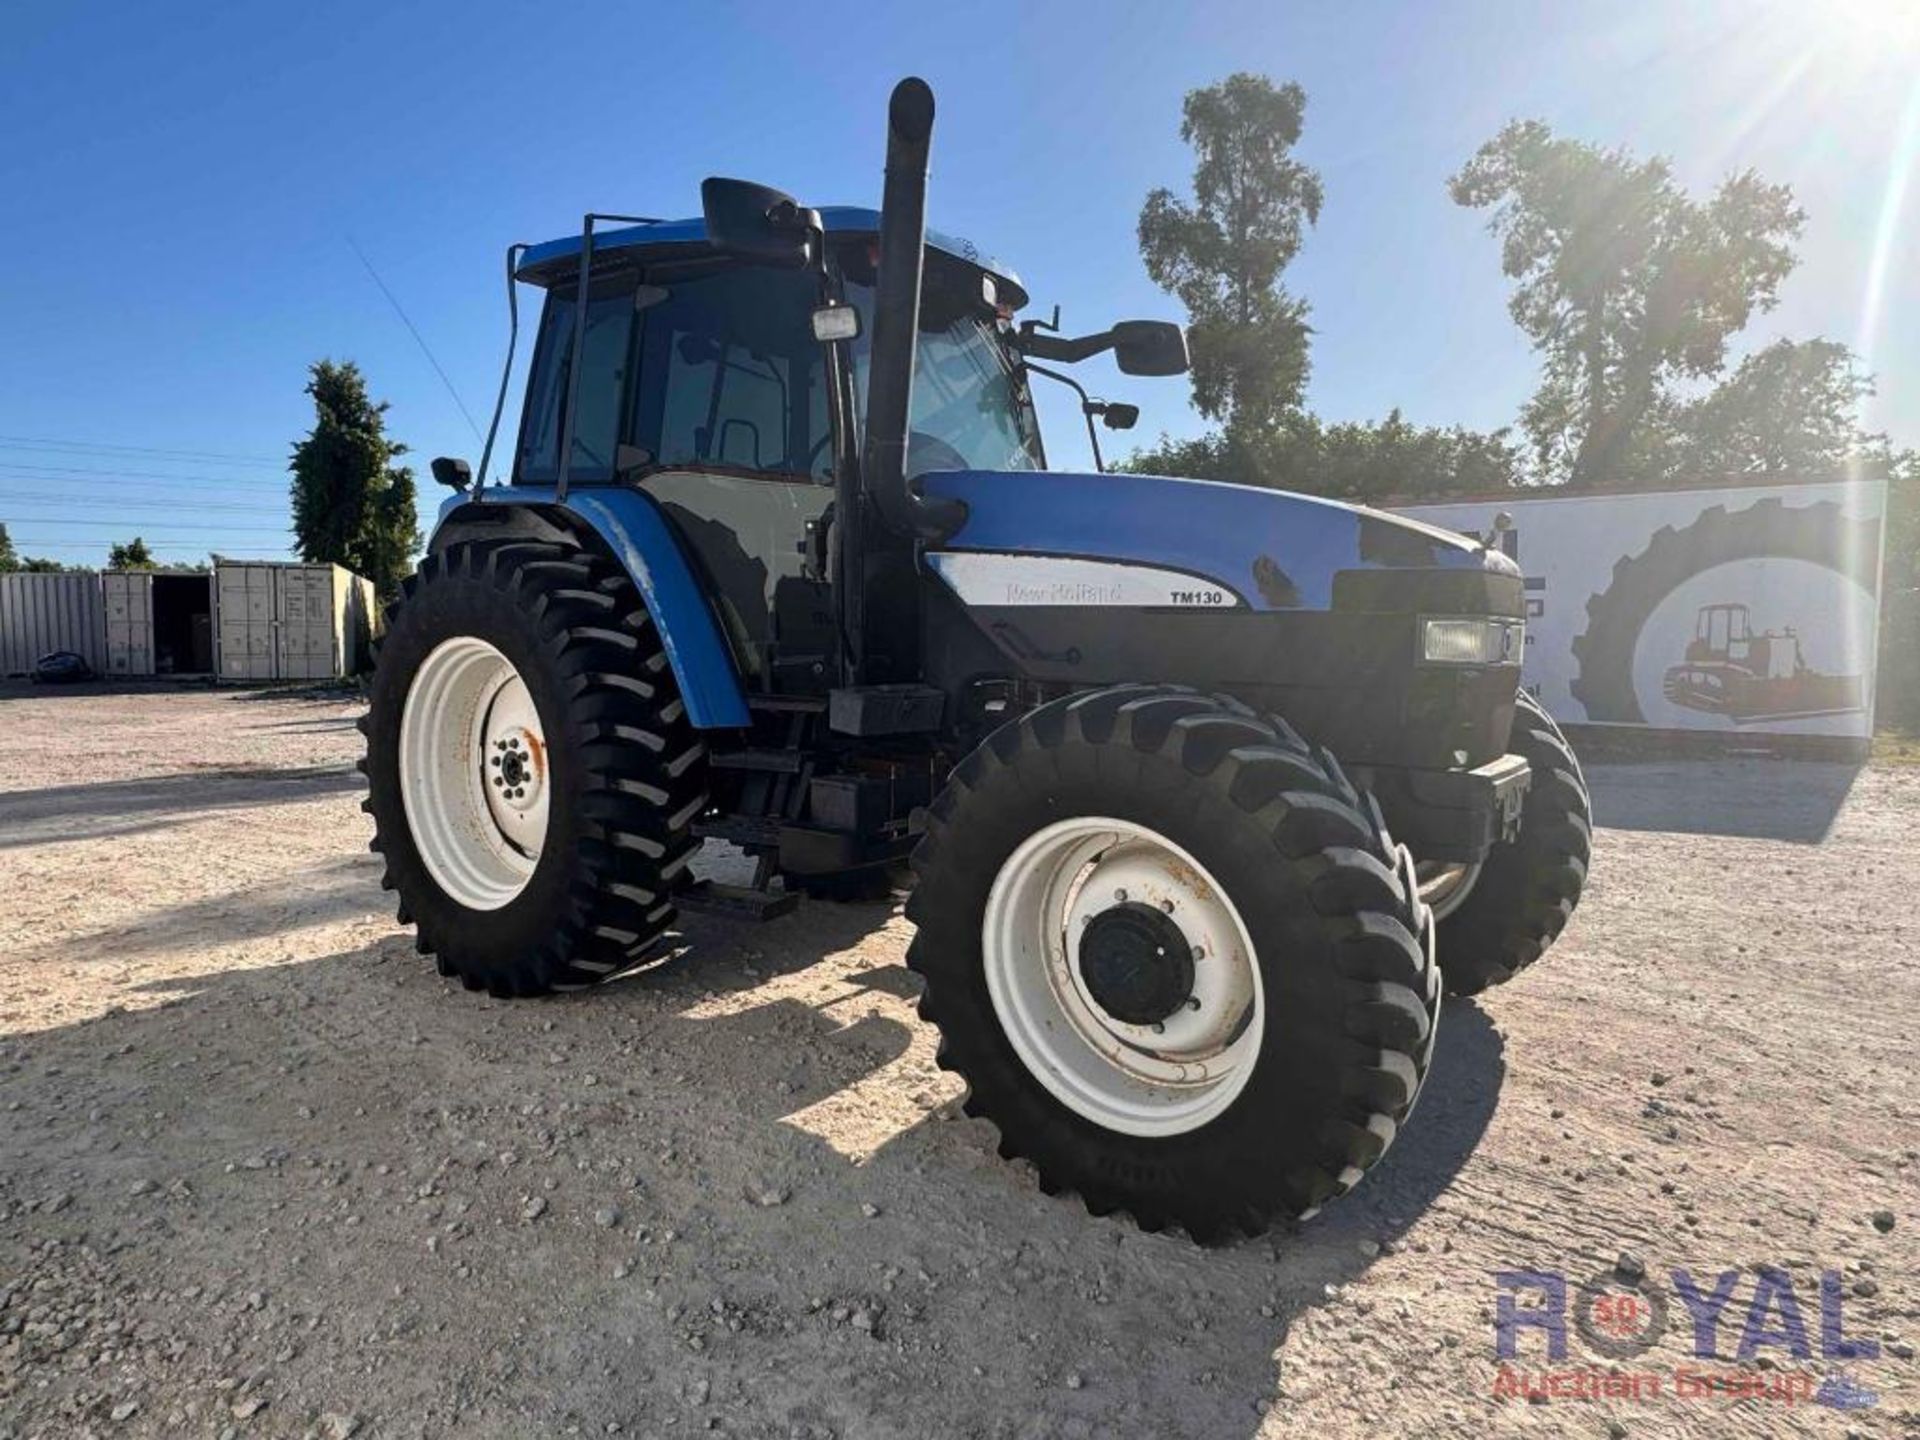 2008 New Holland TM130 4WD Agricultural Tractor - Image 2 of 22